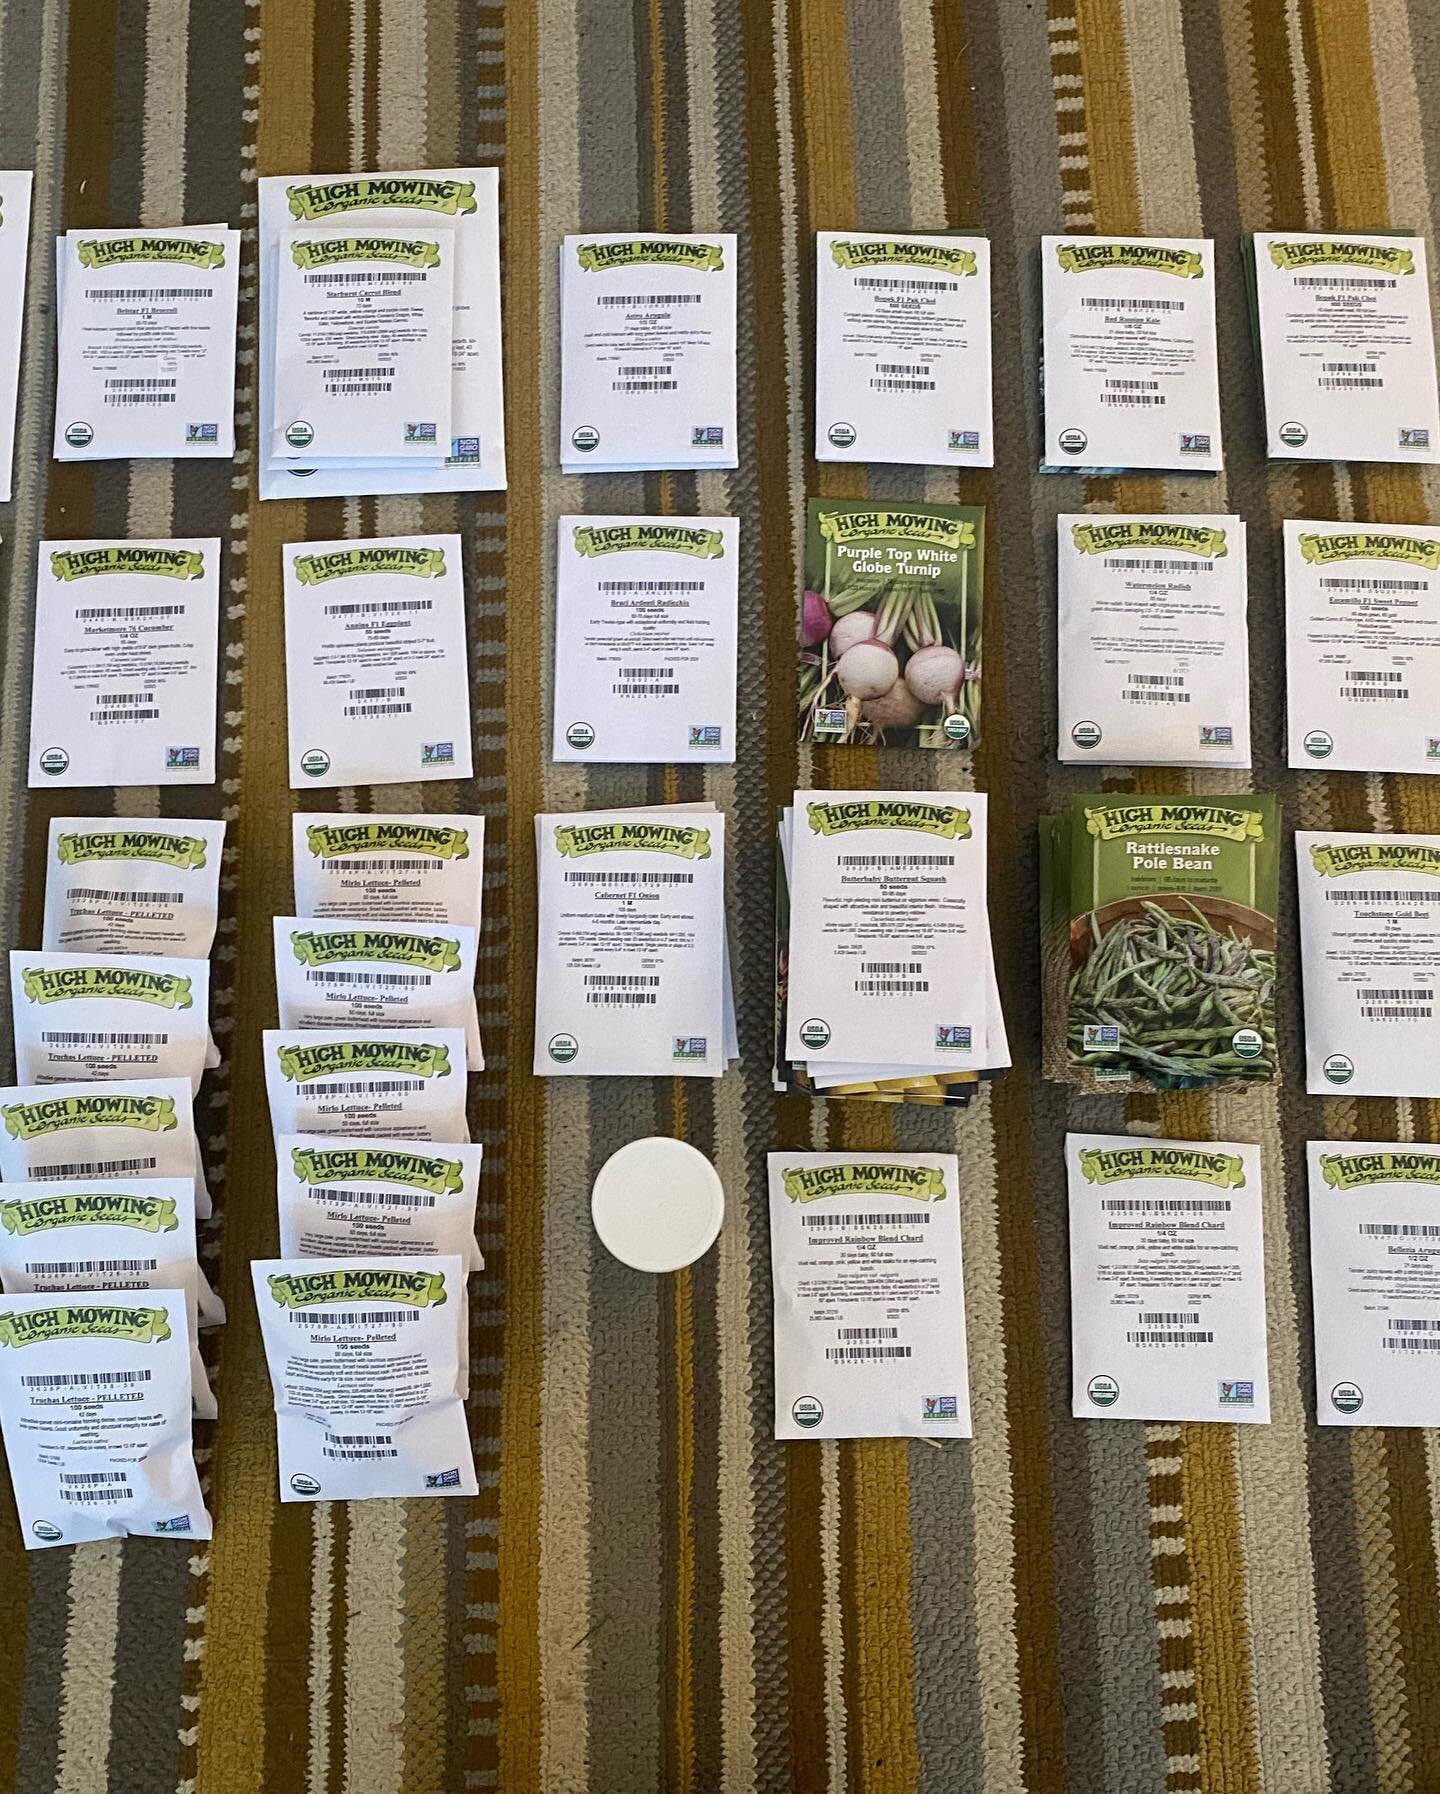 Happy #csaweek everyone! We&rsquo;ve been busy getting ready for the 2024 season:

1/Seeds, seeds, and more seeds! Lots of fresh salad coming soon @highmowingorganicseeds 🥗🥒🍅

2/&ldquo;Hot box&rdquo; frames built by @stephryder7 &amp; Adam atop ou